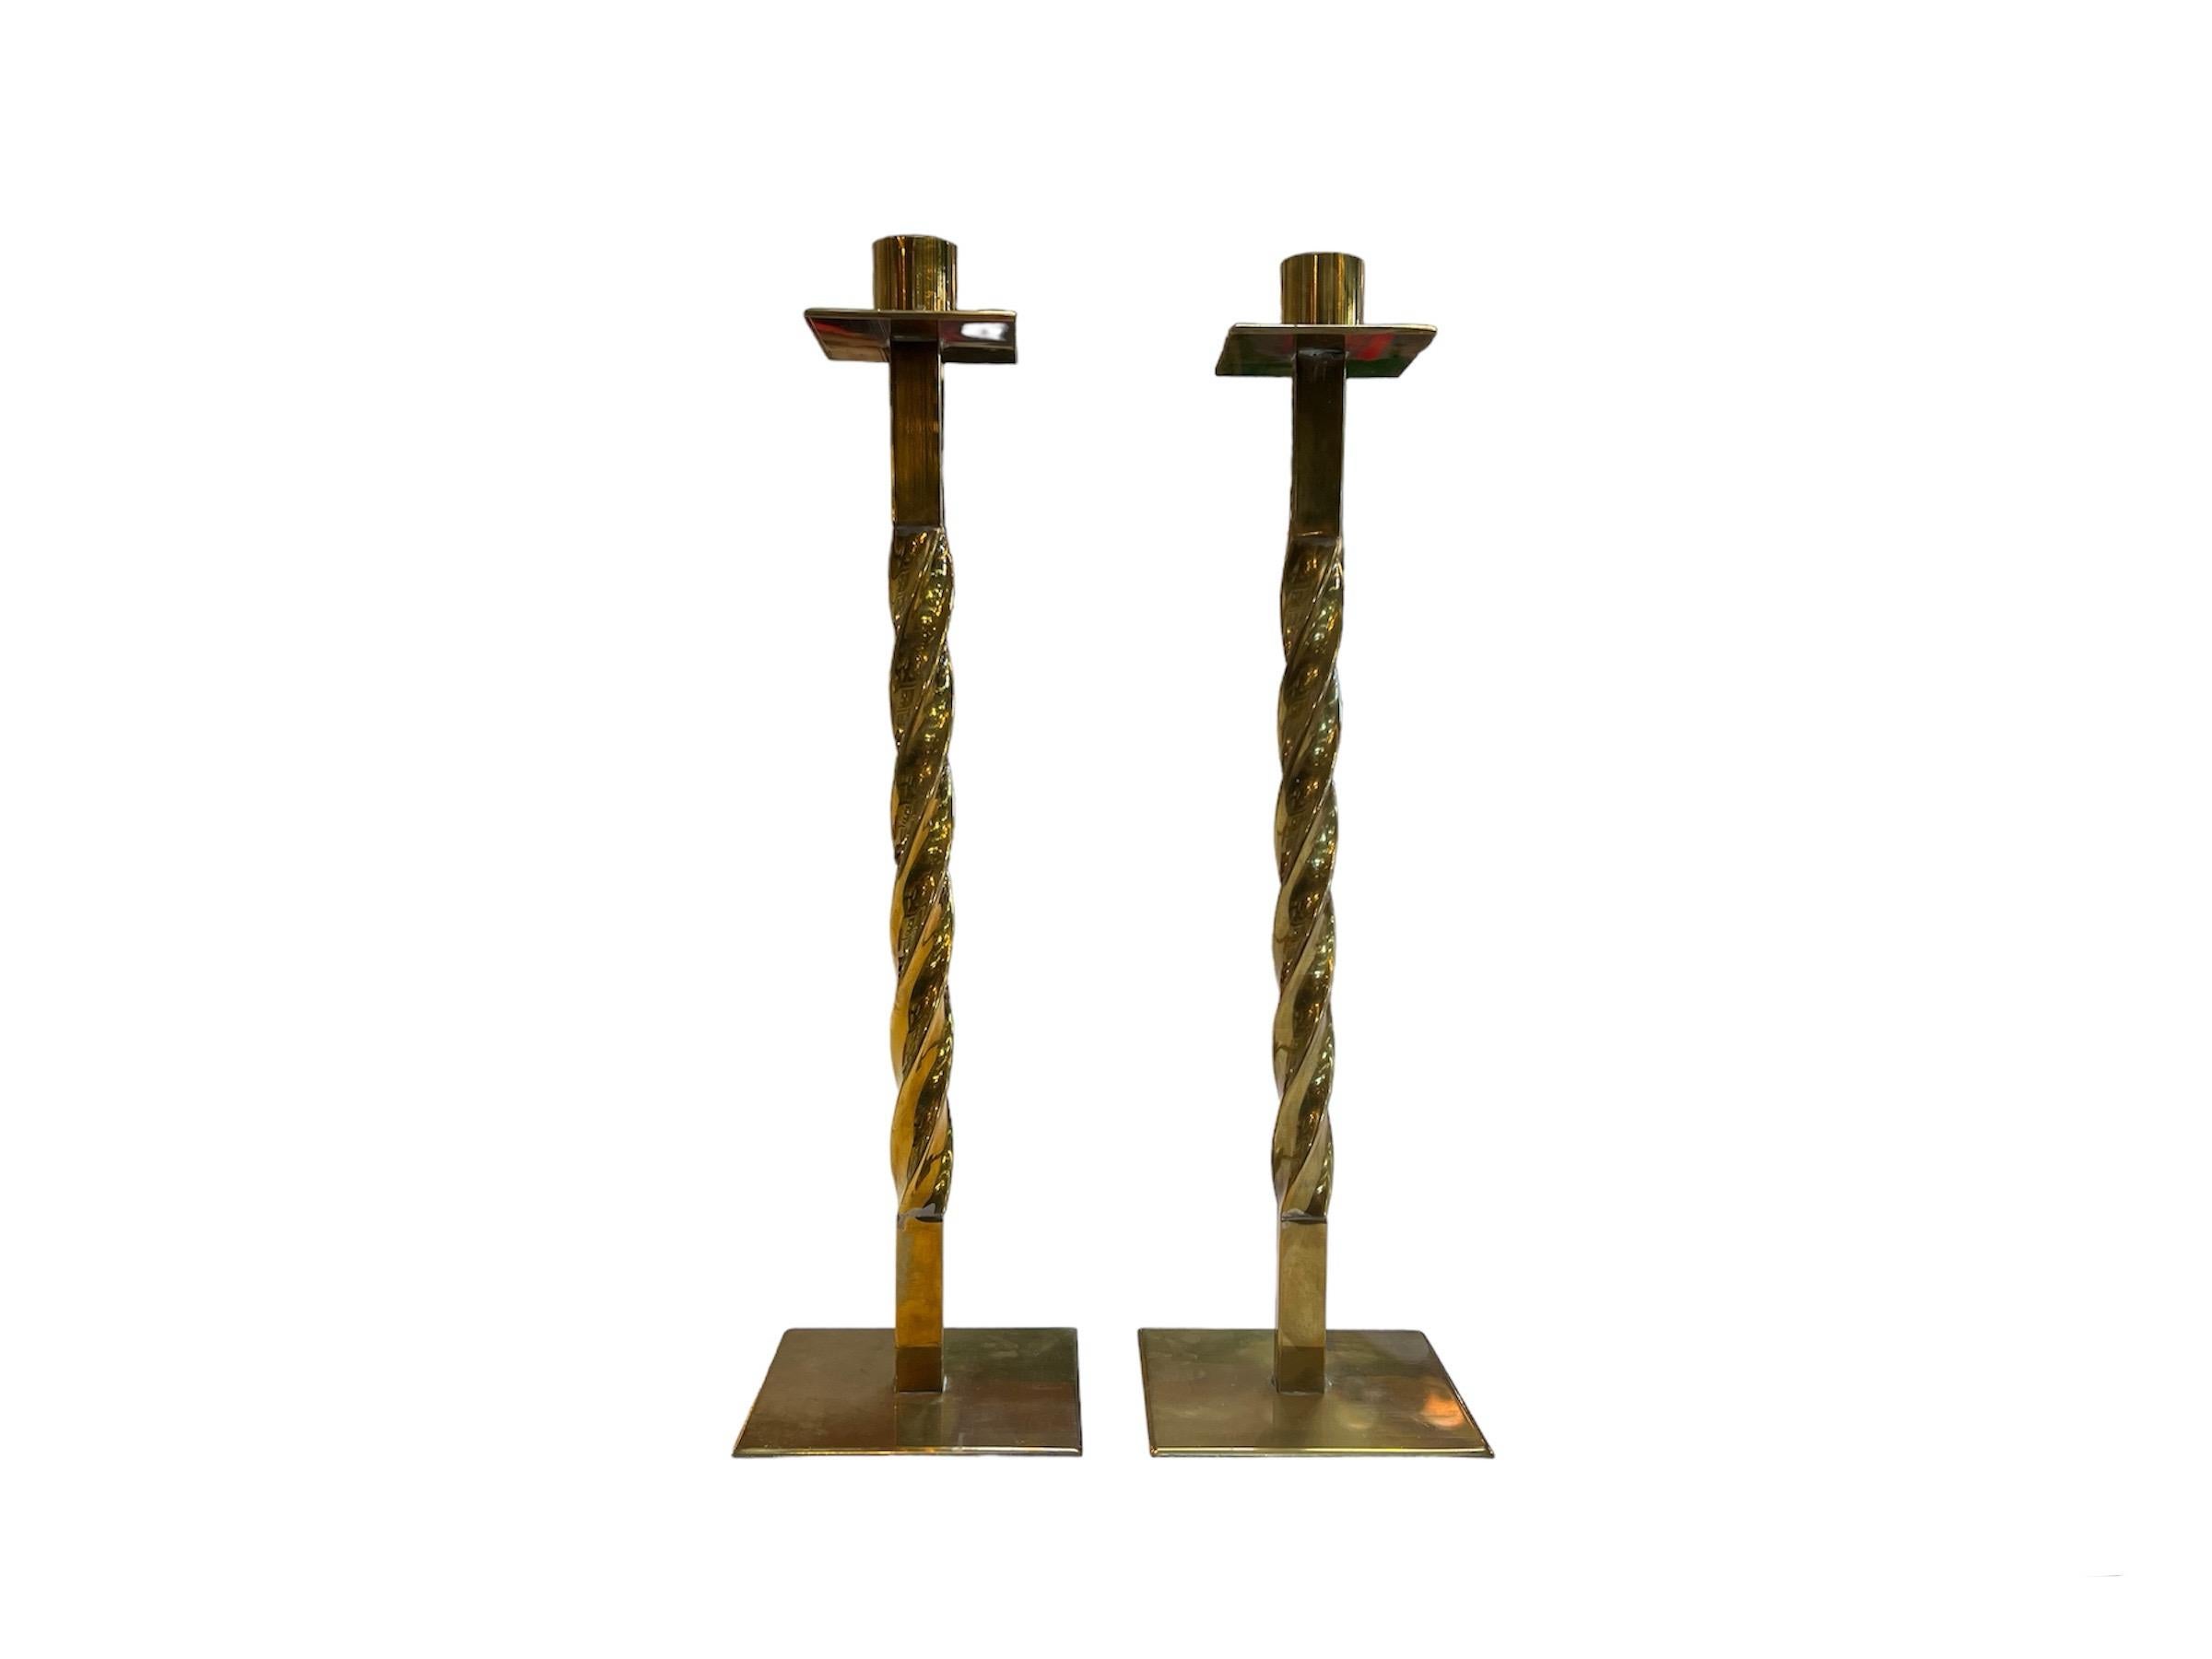 Pair of 2 Vintage Italian Decorative Brass Candlesticks: A set of two antique candle holders from Italy made of brass, featuring intricate and ornate decorative designs, adding a touch of vintage elegance to any space.

